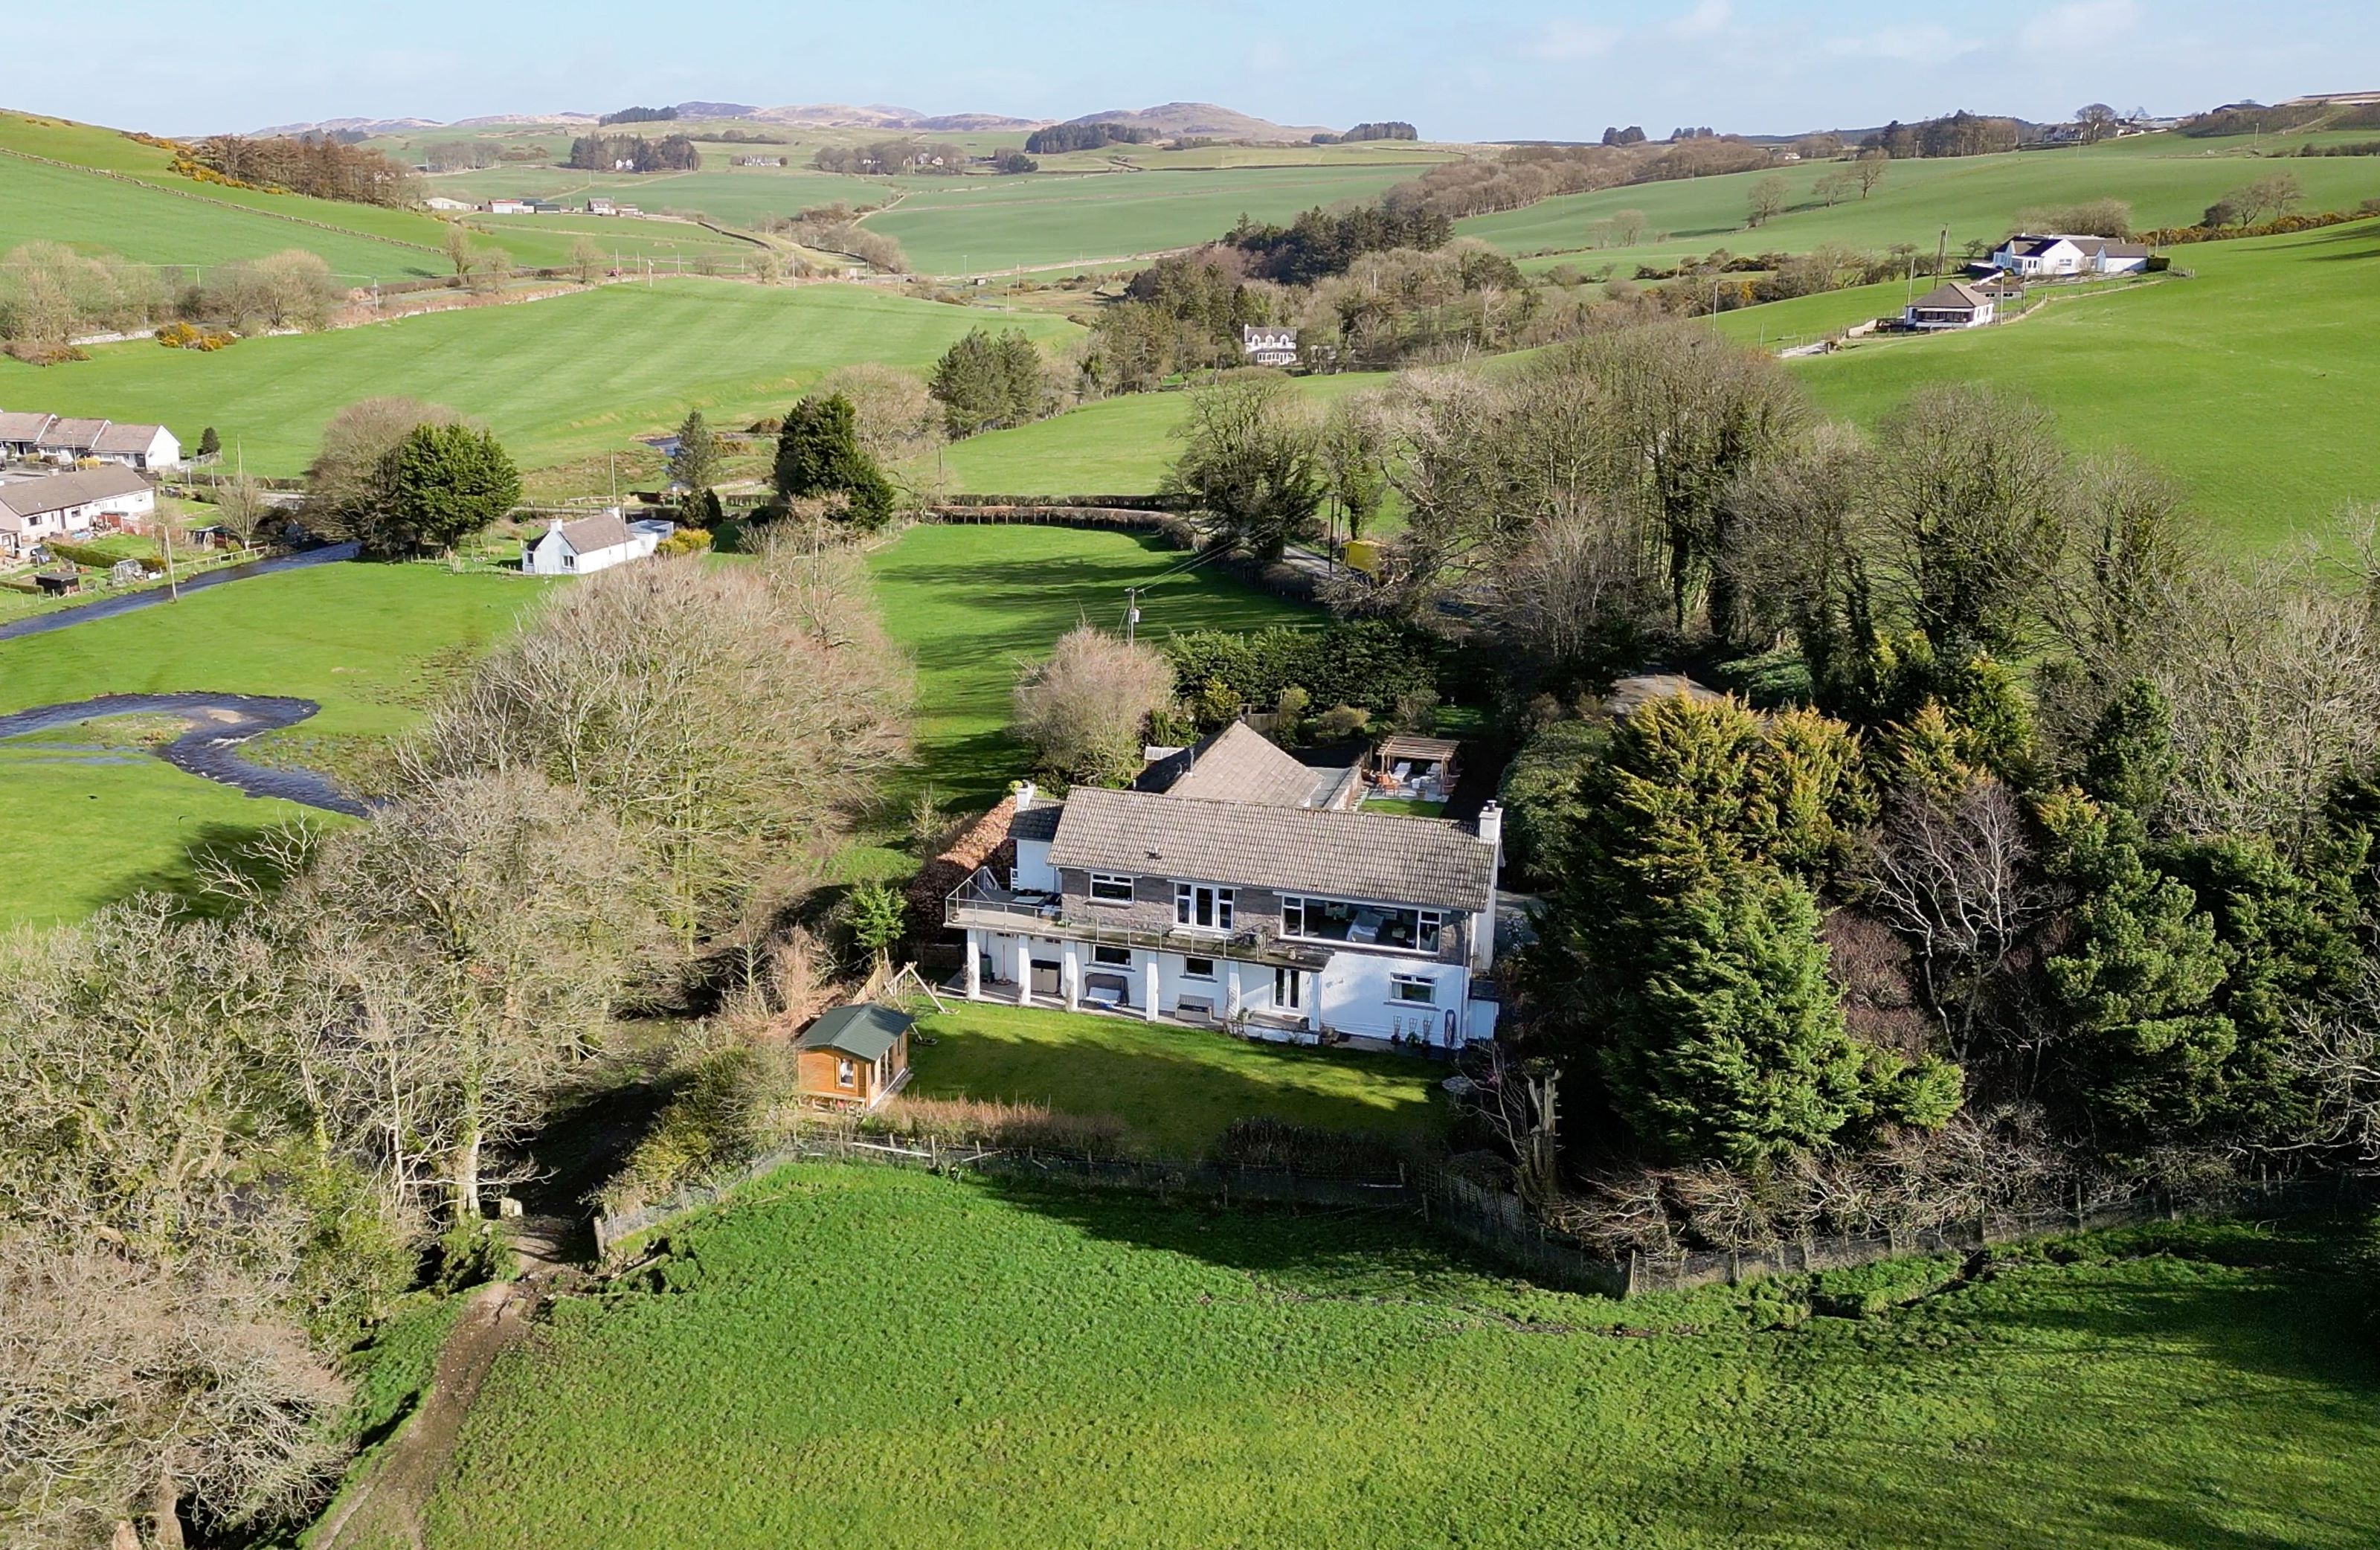 Continued signs of positivity in rural property market, Galbraith report finds